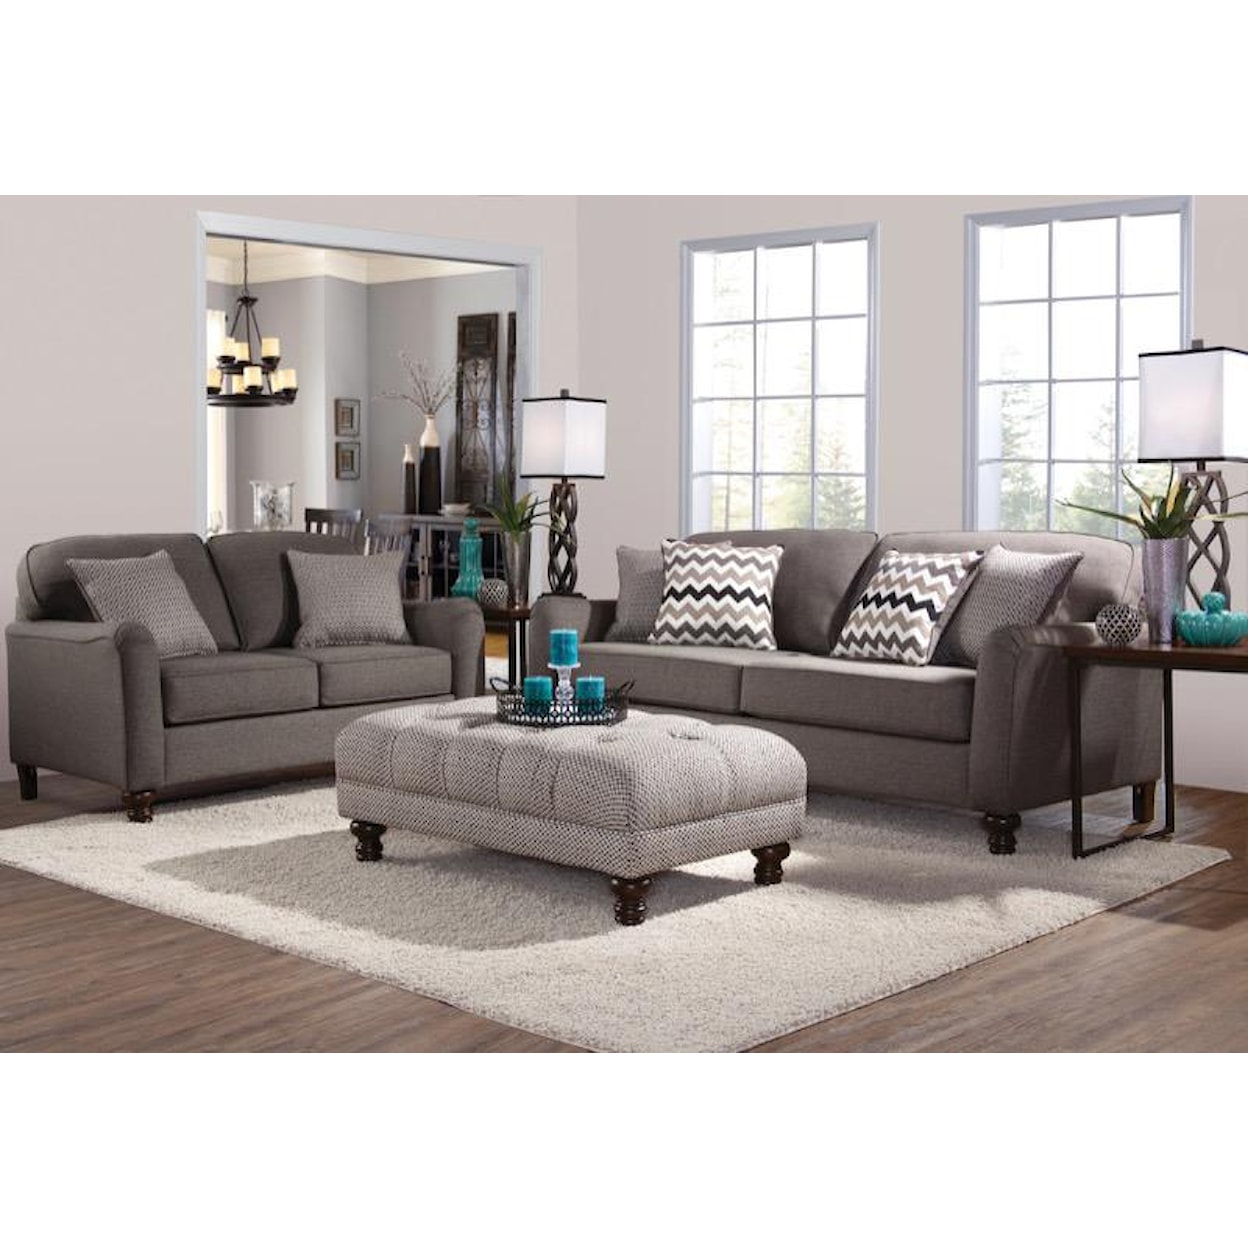 Serta Upholstery by Hughes Furniture 4050 Transitional Loveseat